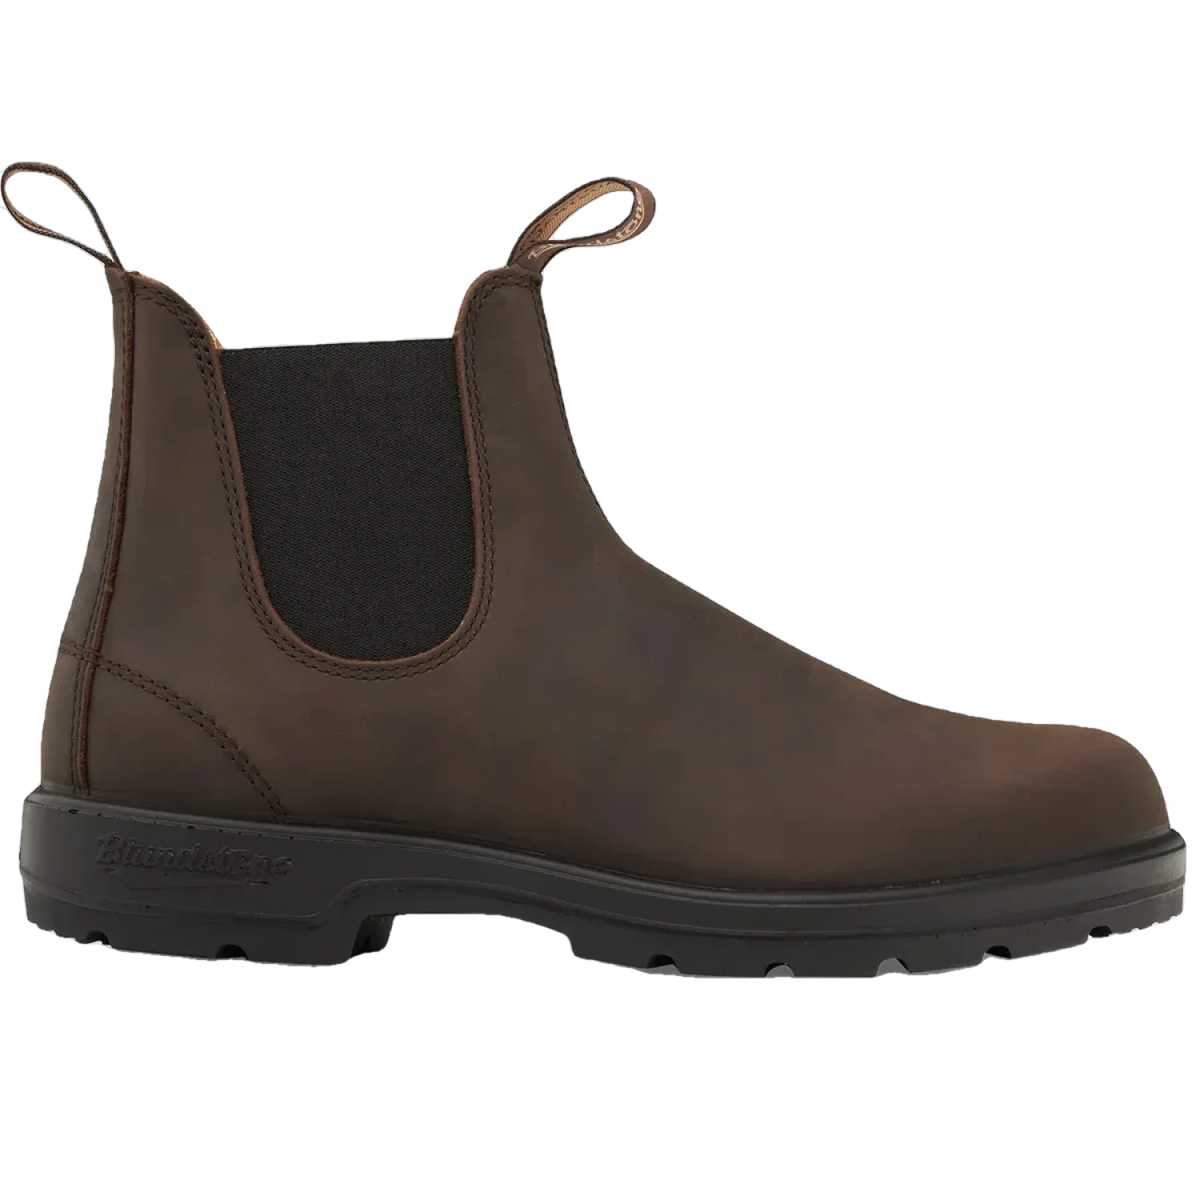 BLUNDSTONE 10. BOOTS - MENS BOOTS #2340 BROWN